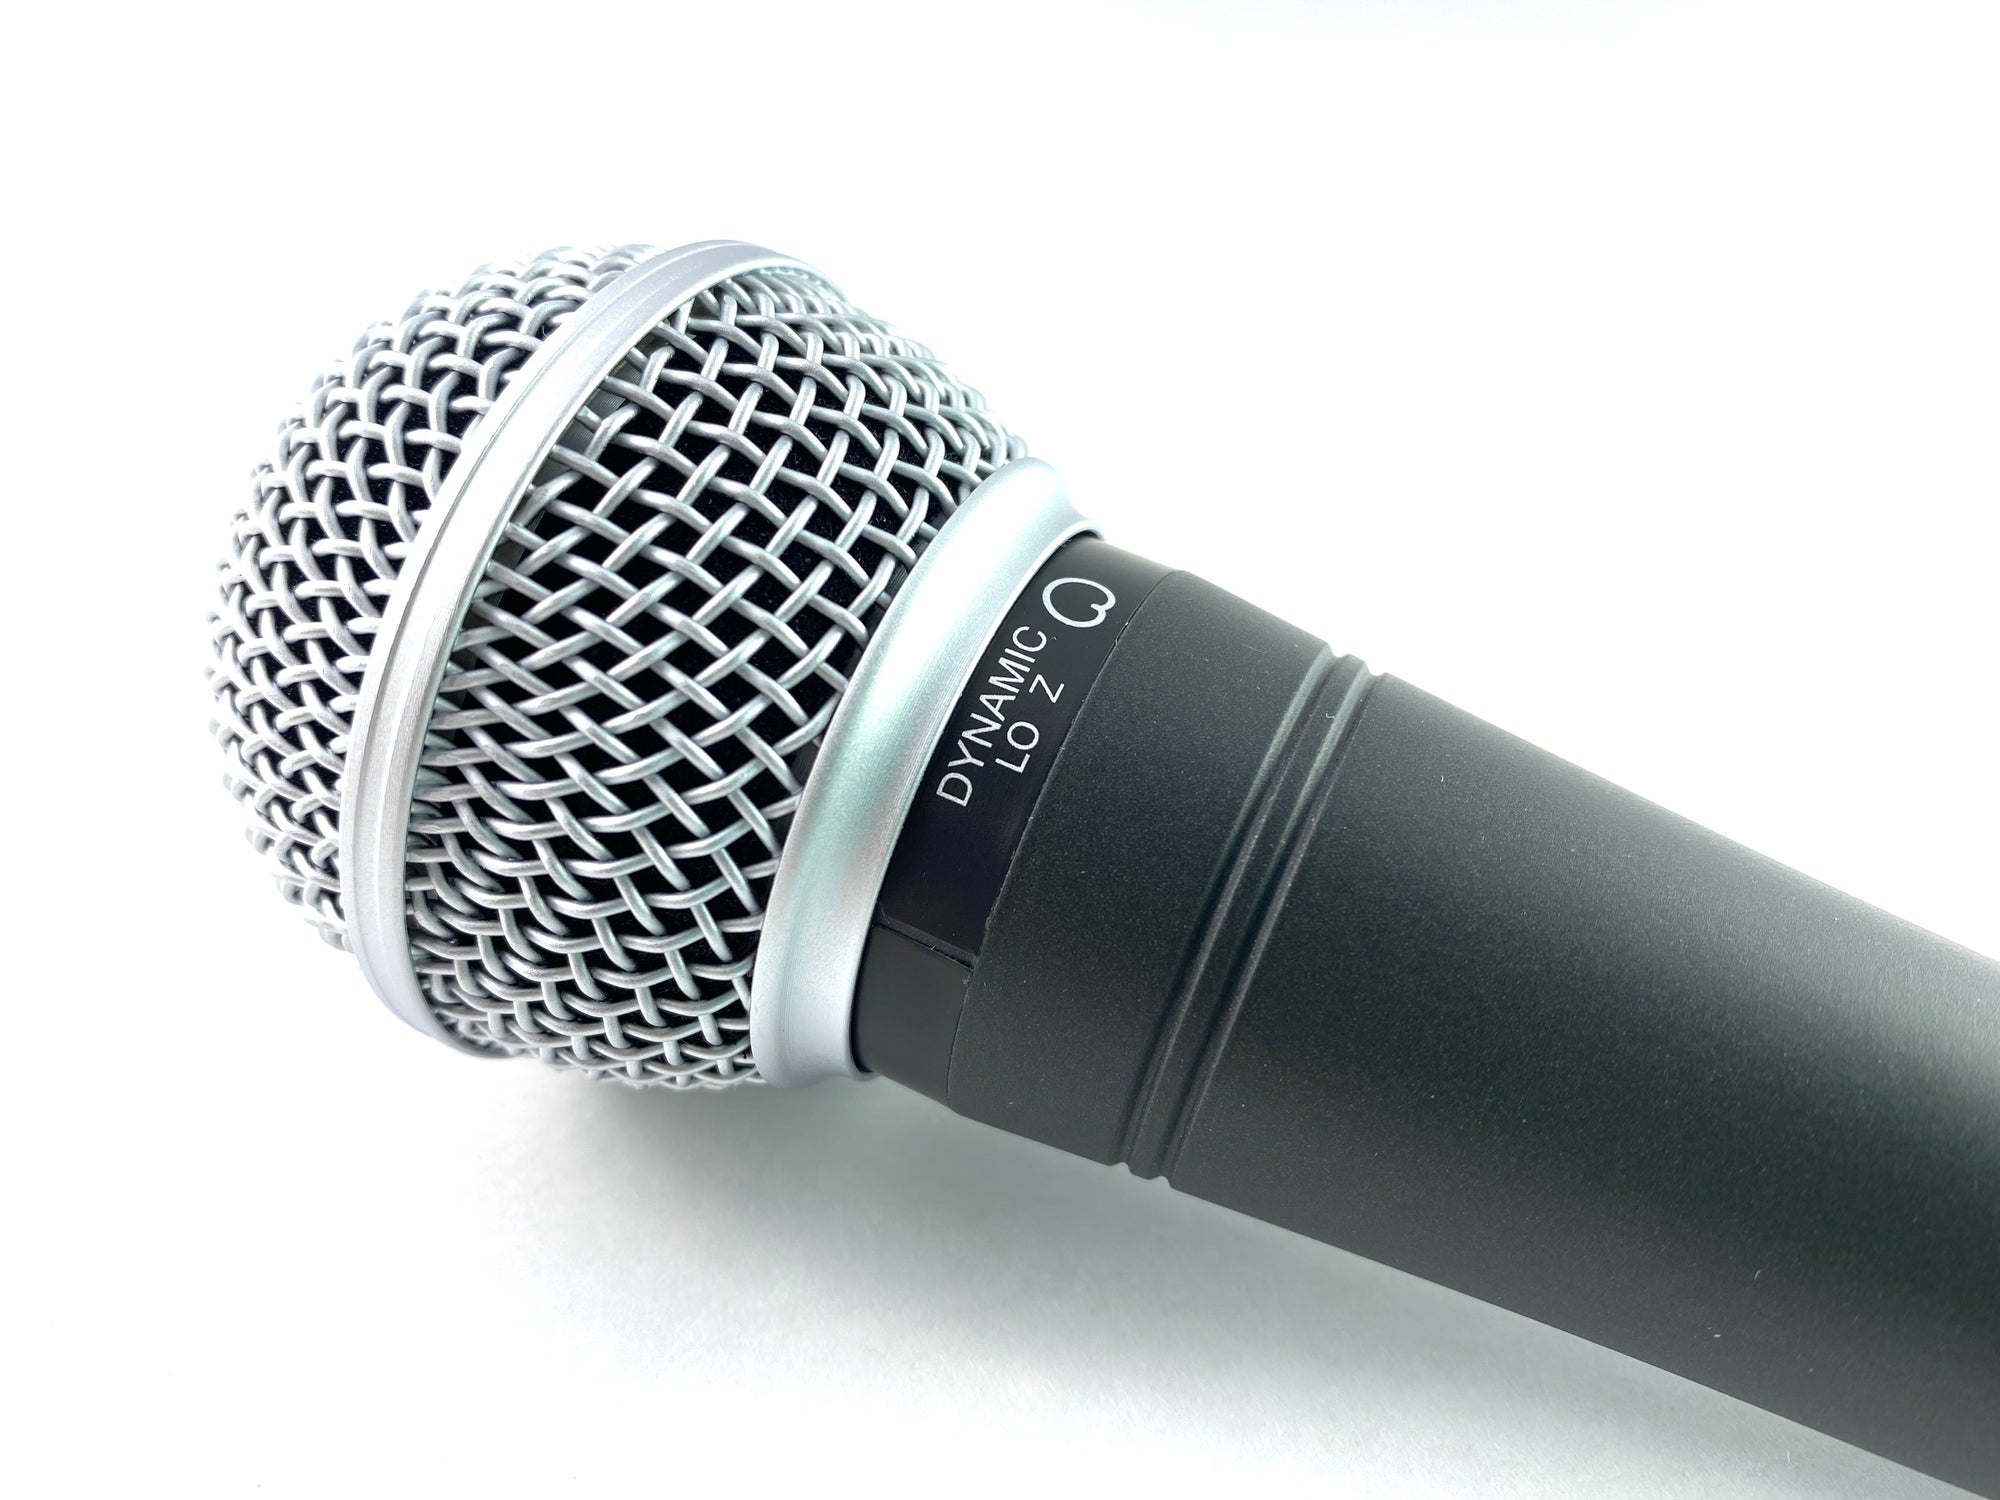 SHURE SM58 DYNAMIC VOCAL MICROPHONE